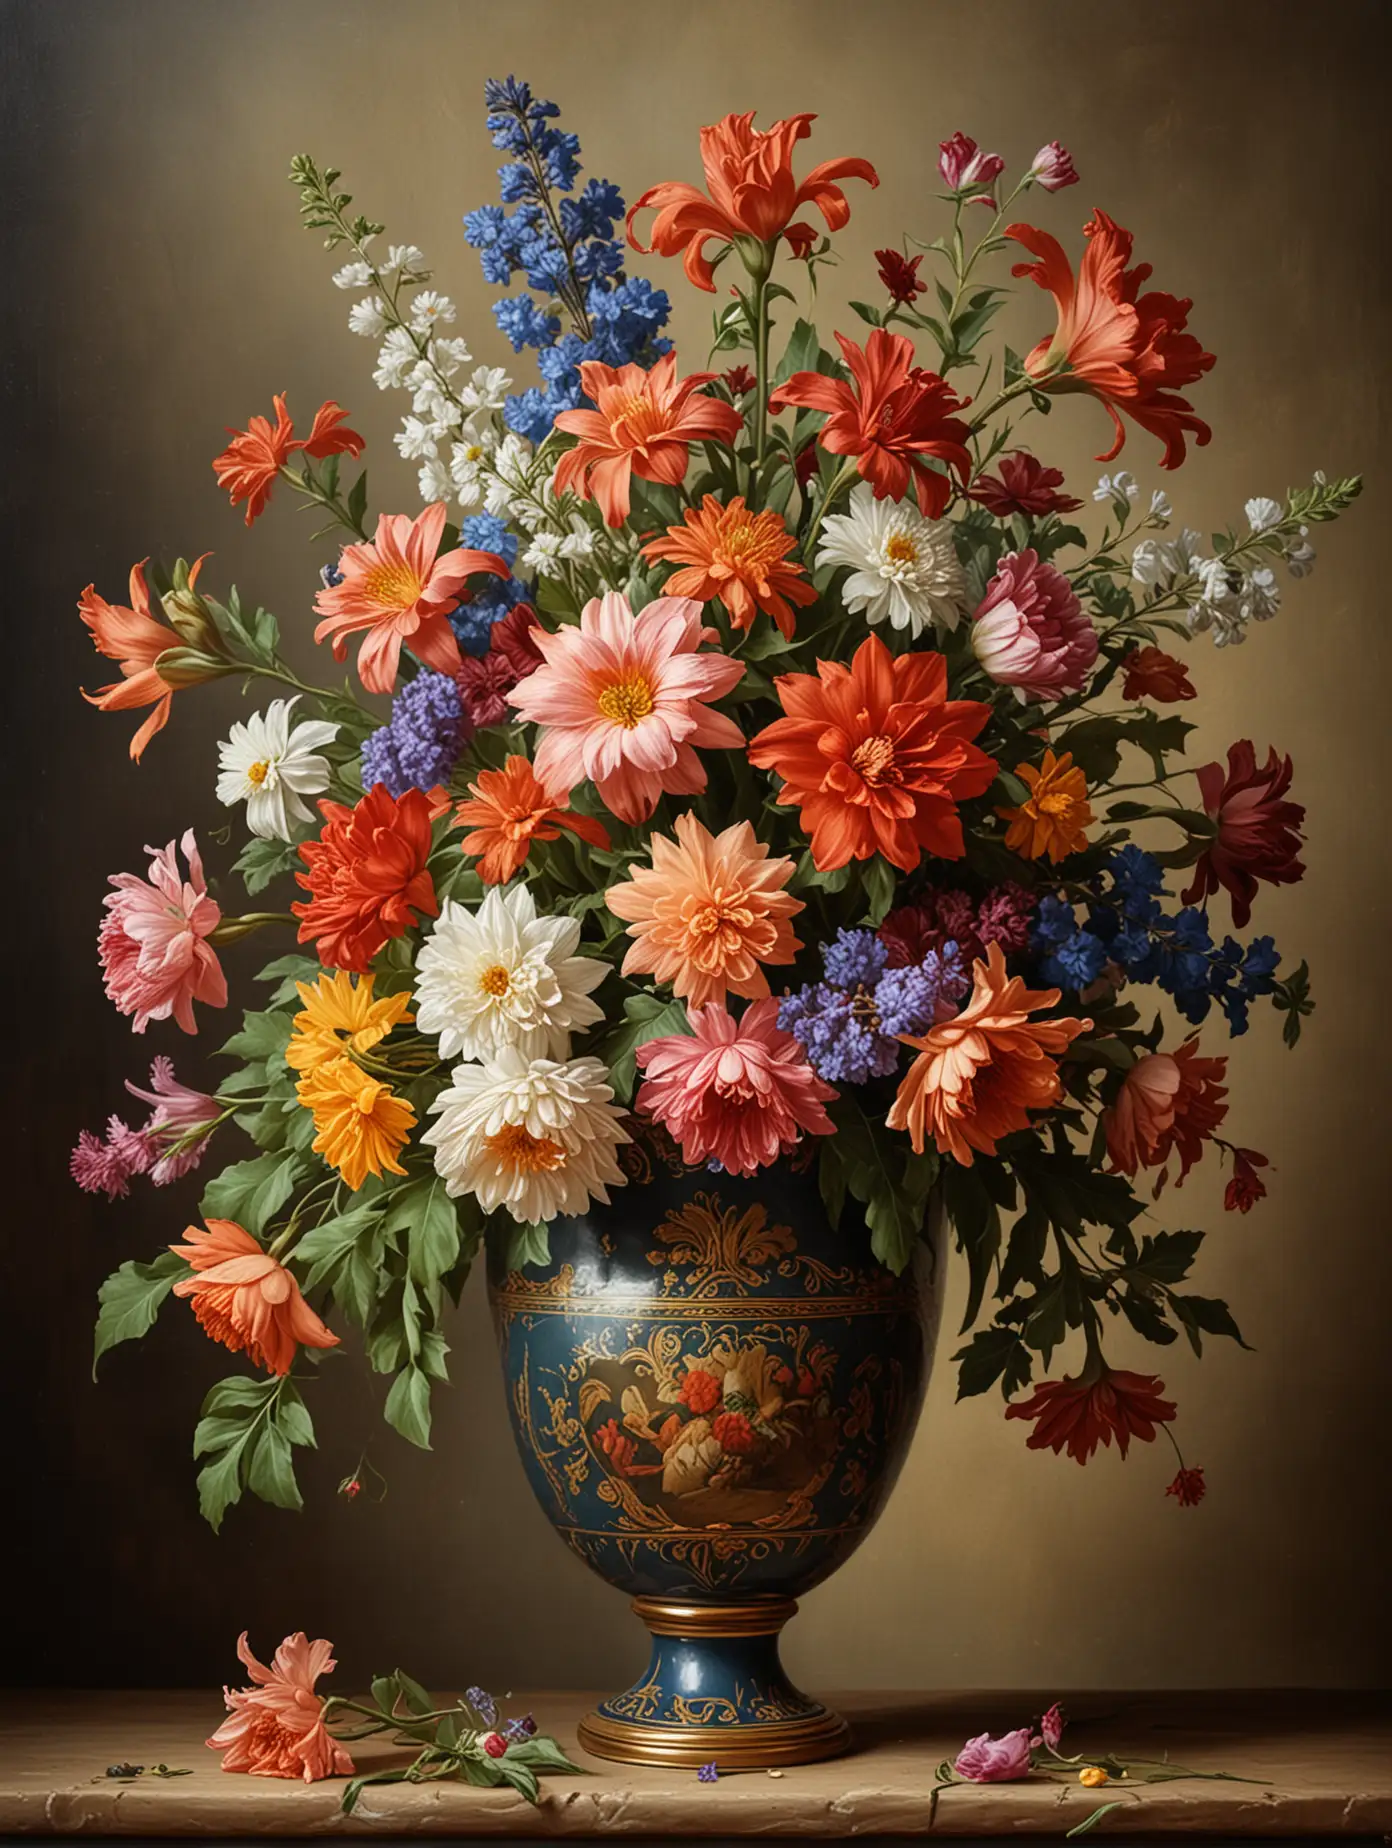 Renaissancestyle Oil Painting of a Majestic Vase of Flowers